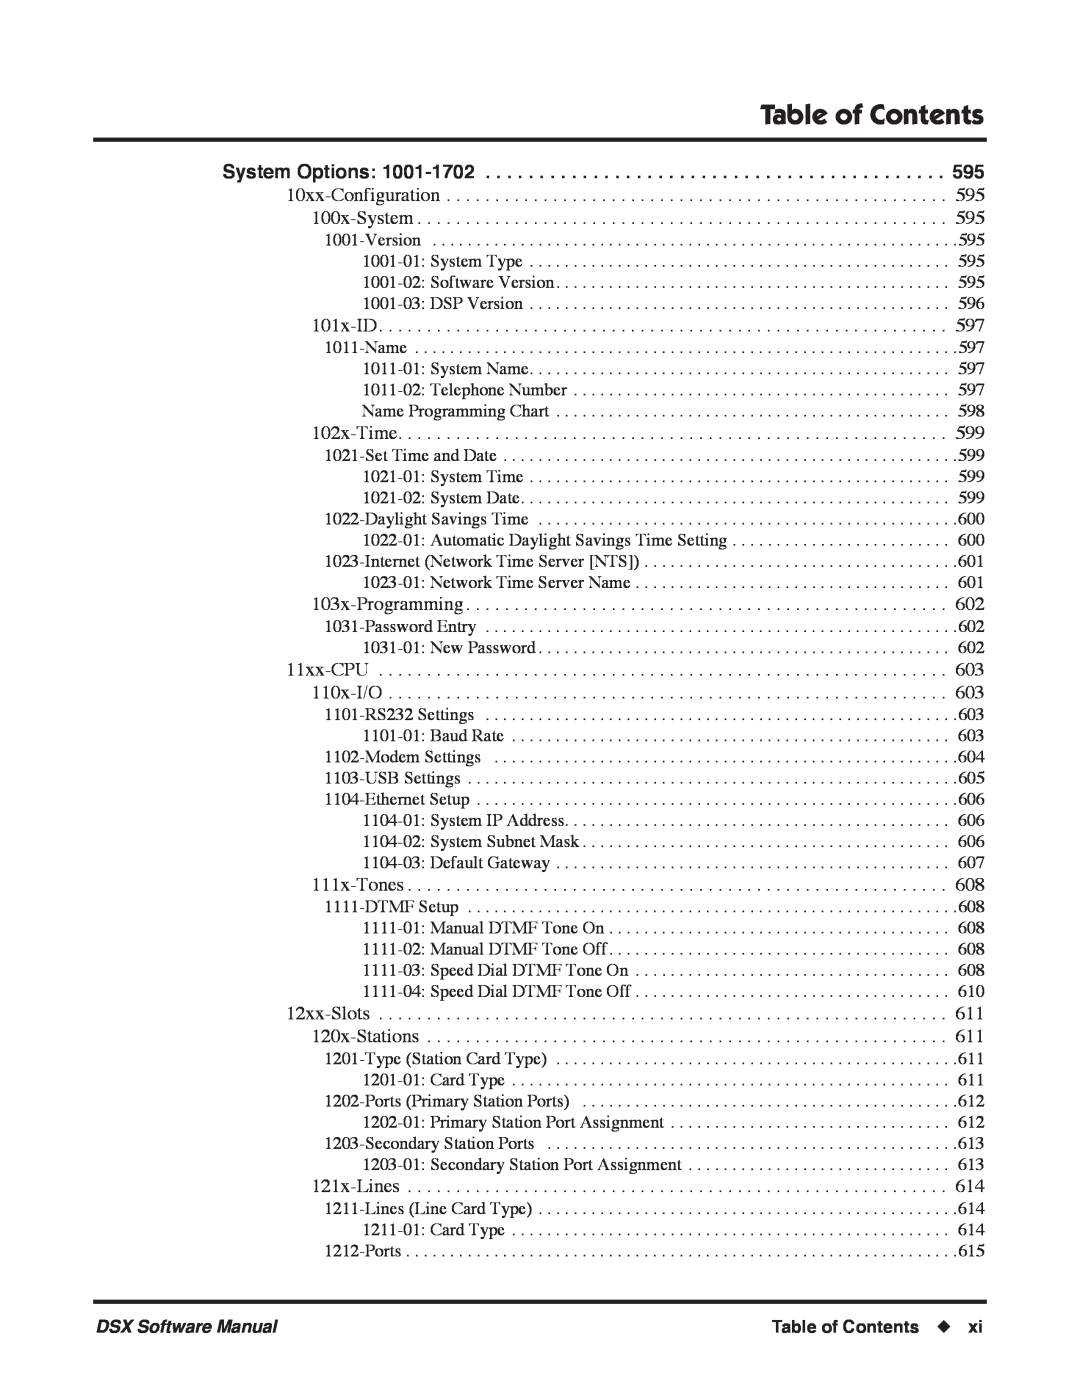 NEC P, N 1093100 software manual Table of Contents 